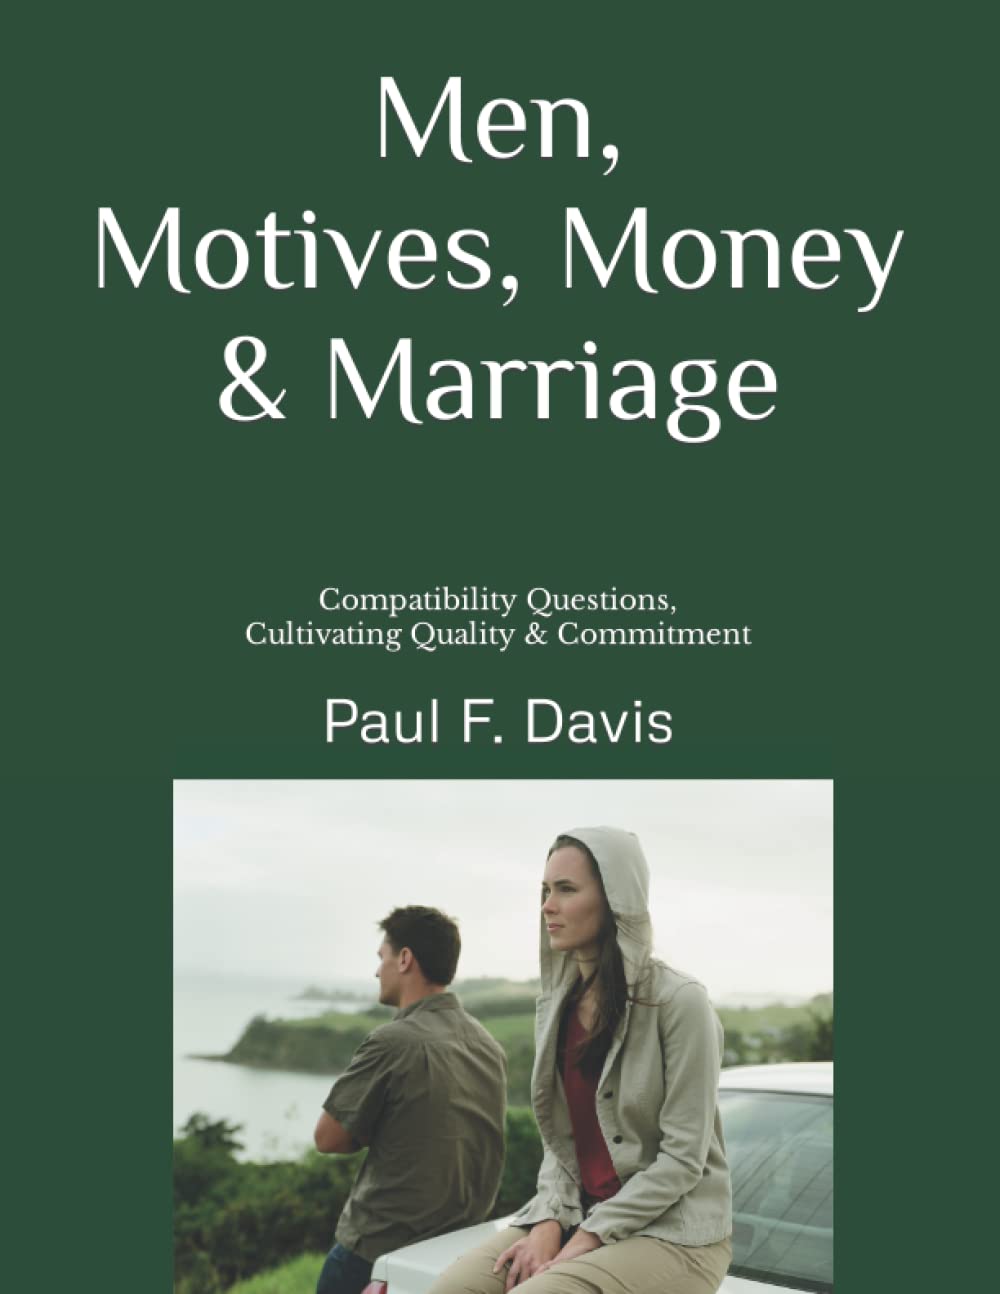 Men, Motives, Money & Marriage: Compatibility Questions, Cultivating Quality & Commitment